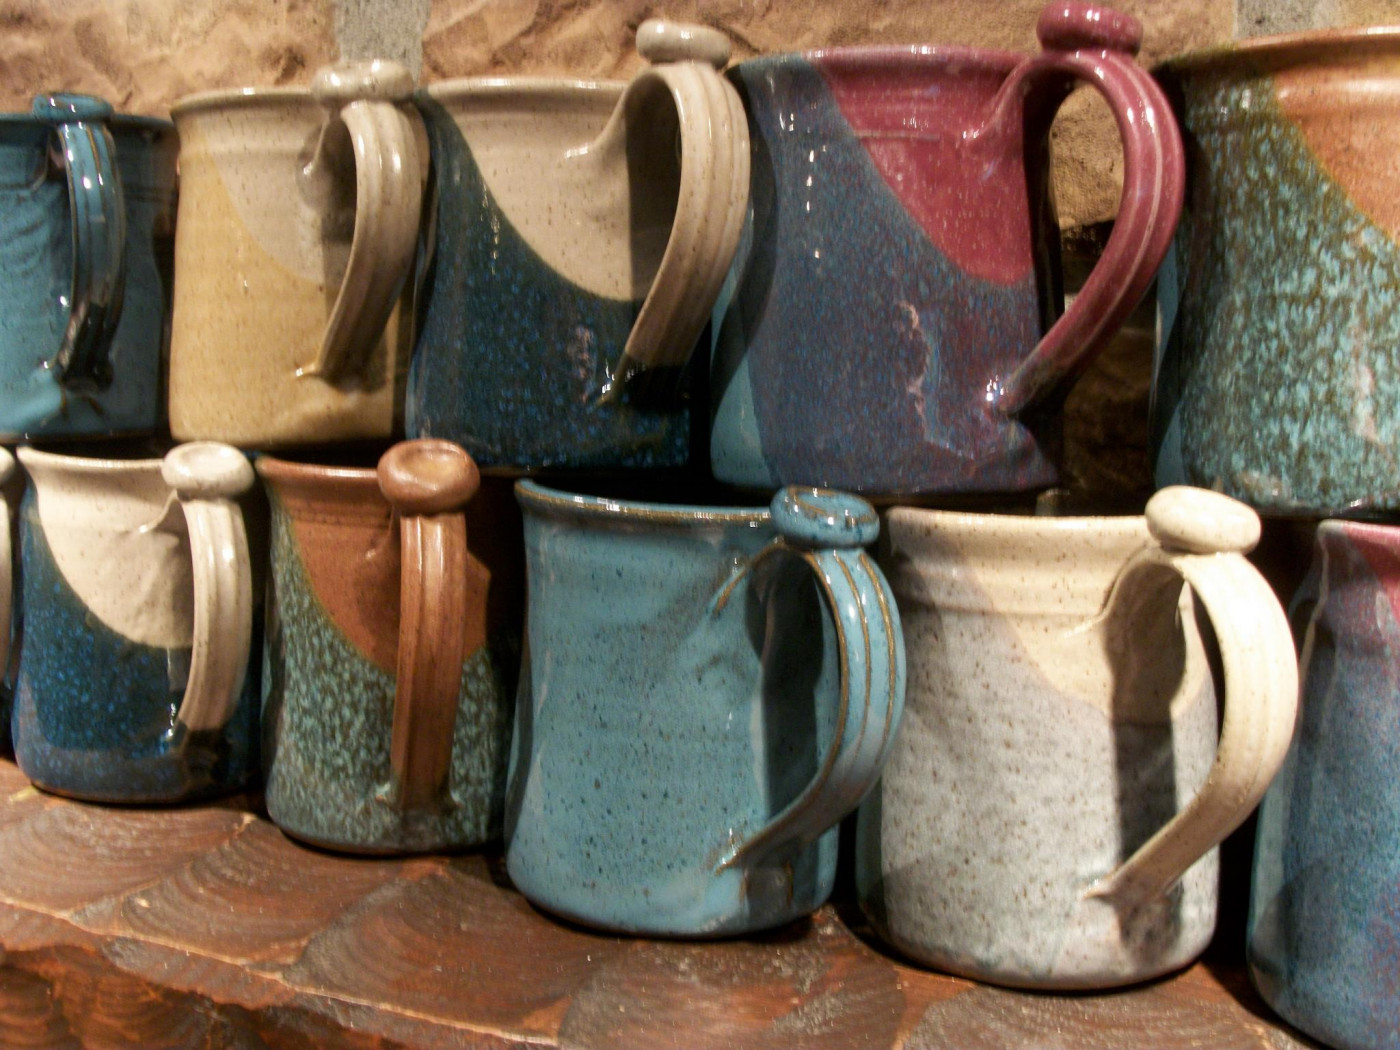 A line of mugs from the Greg Rudd Pottery Studio